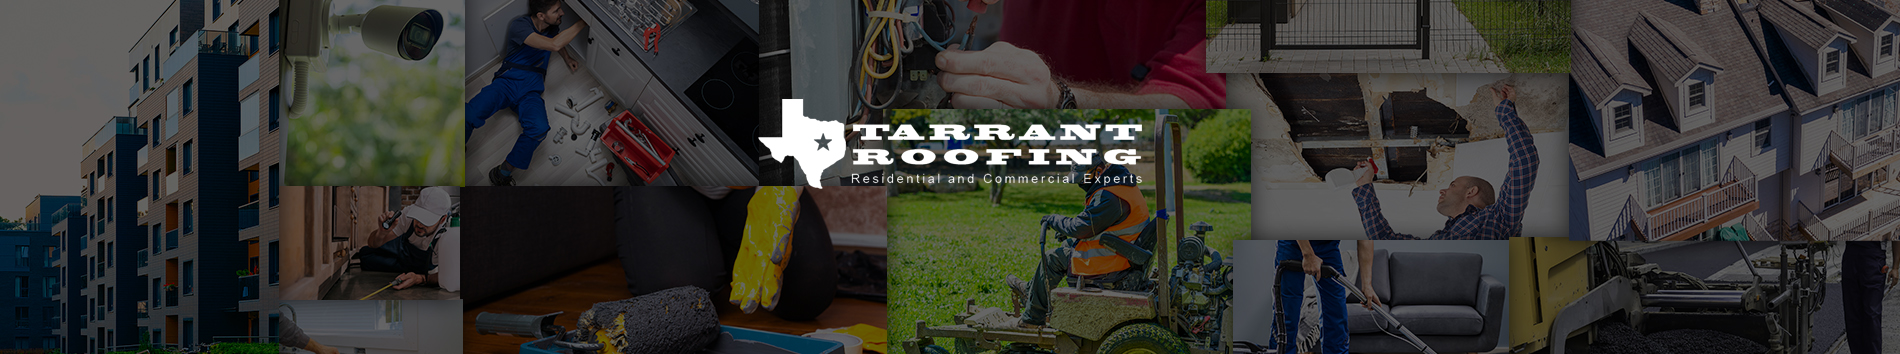 Tarrant Roofing and General Contracting